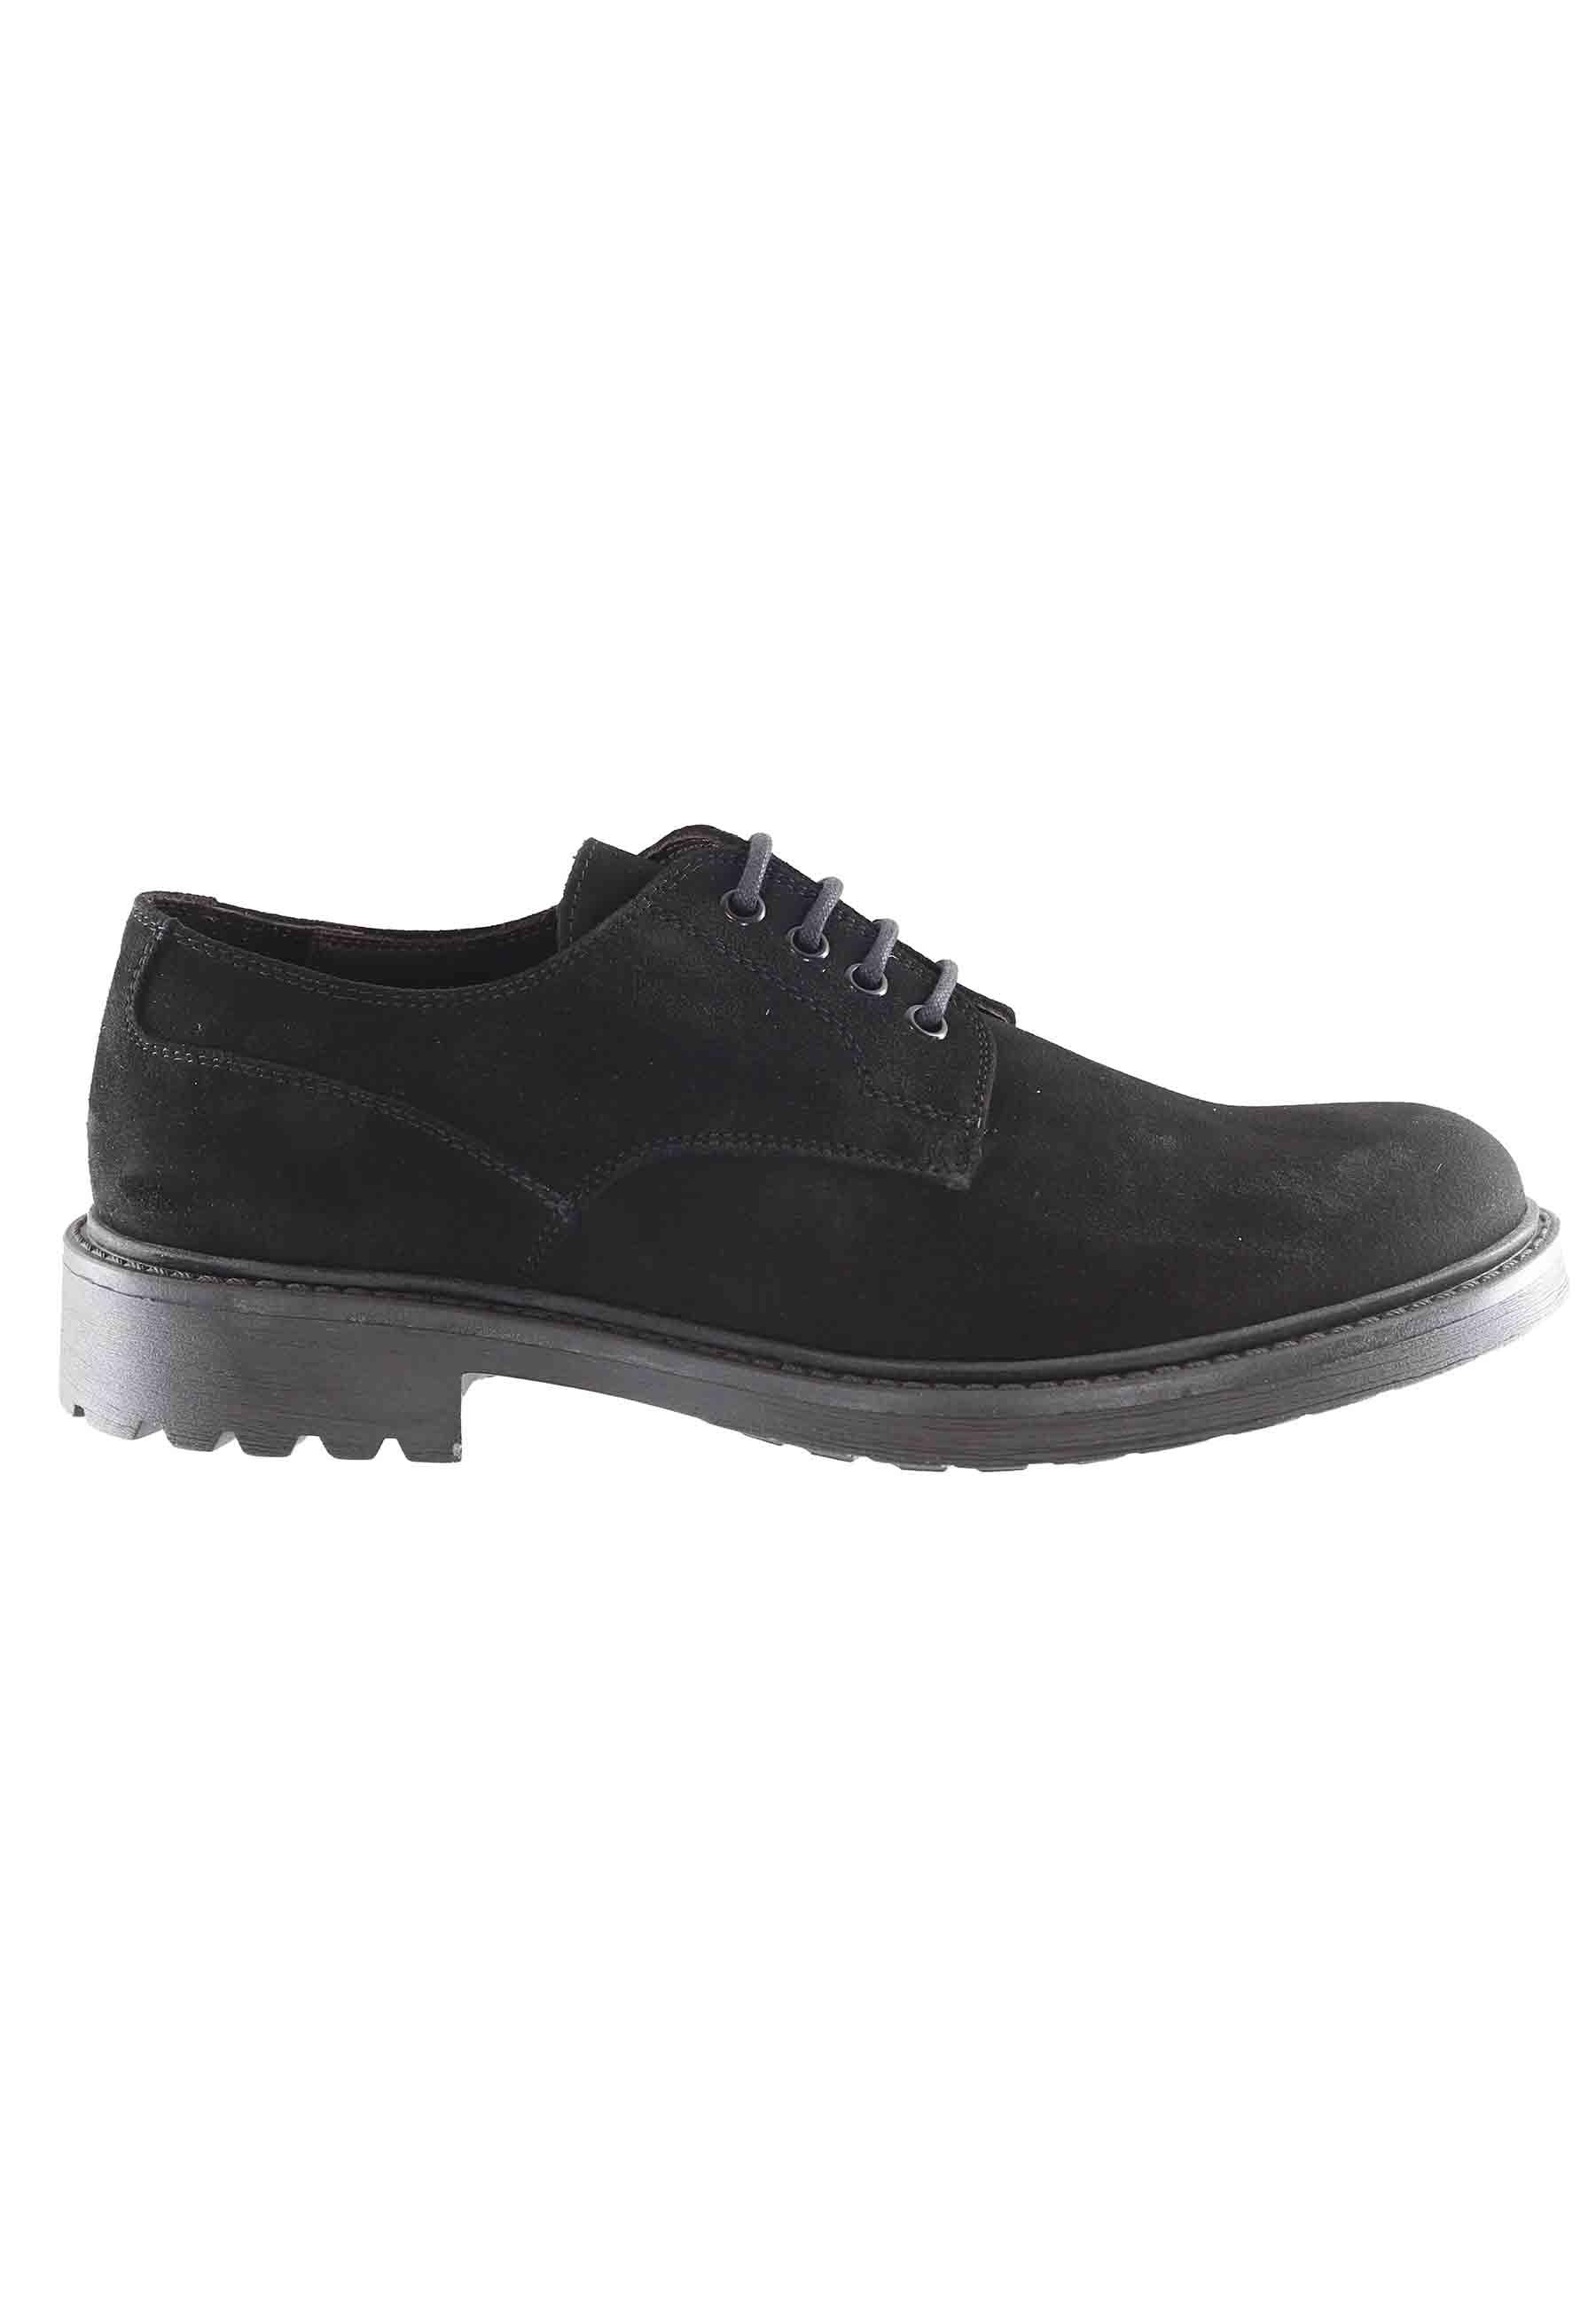 Men's lace-ups in black greased suede with rubber sole